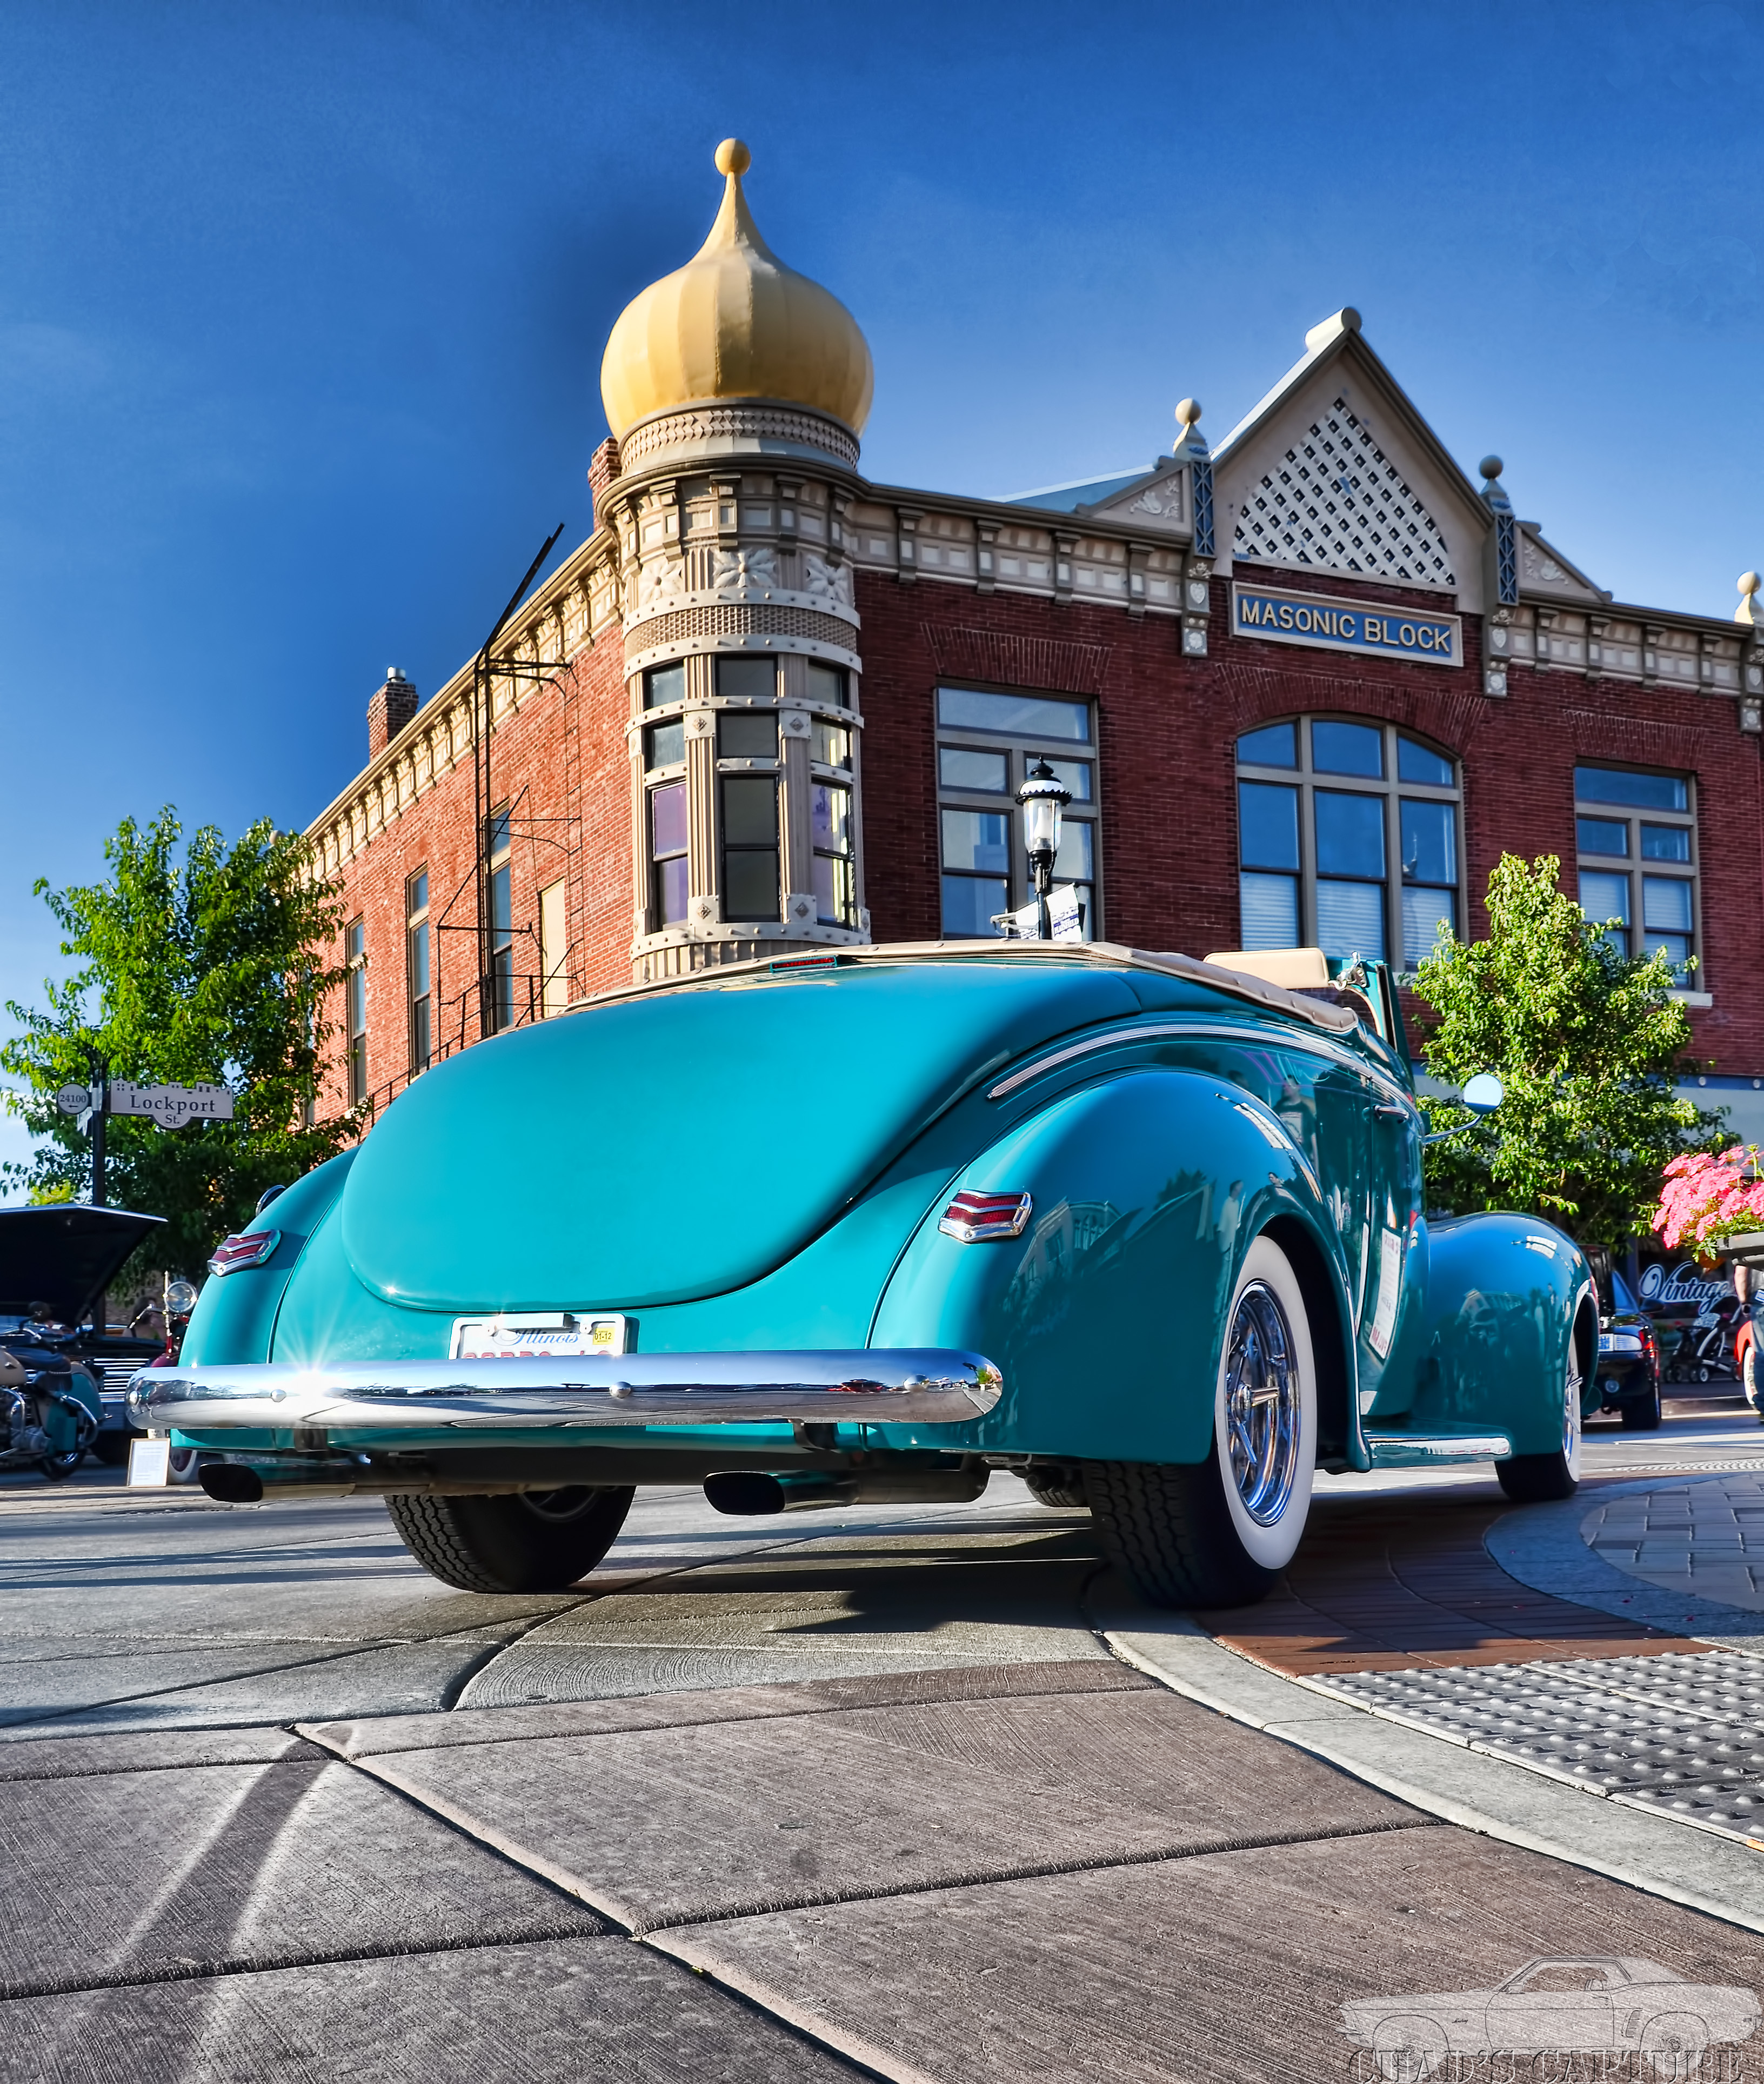 Photo of a classic car driving through downtown Plainfield.